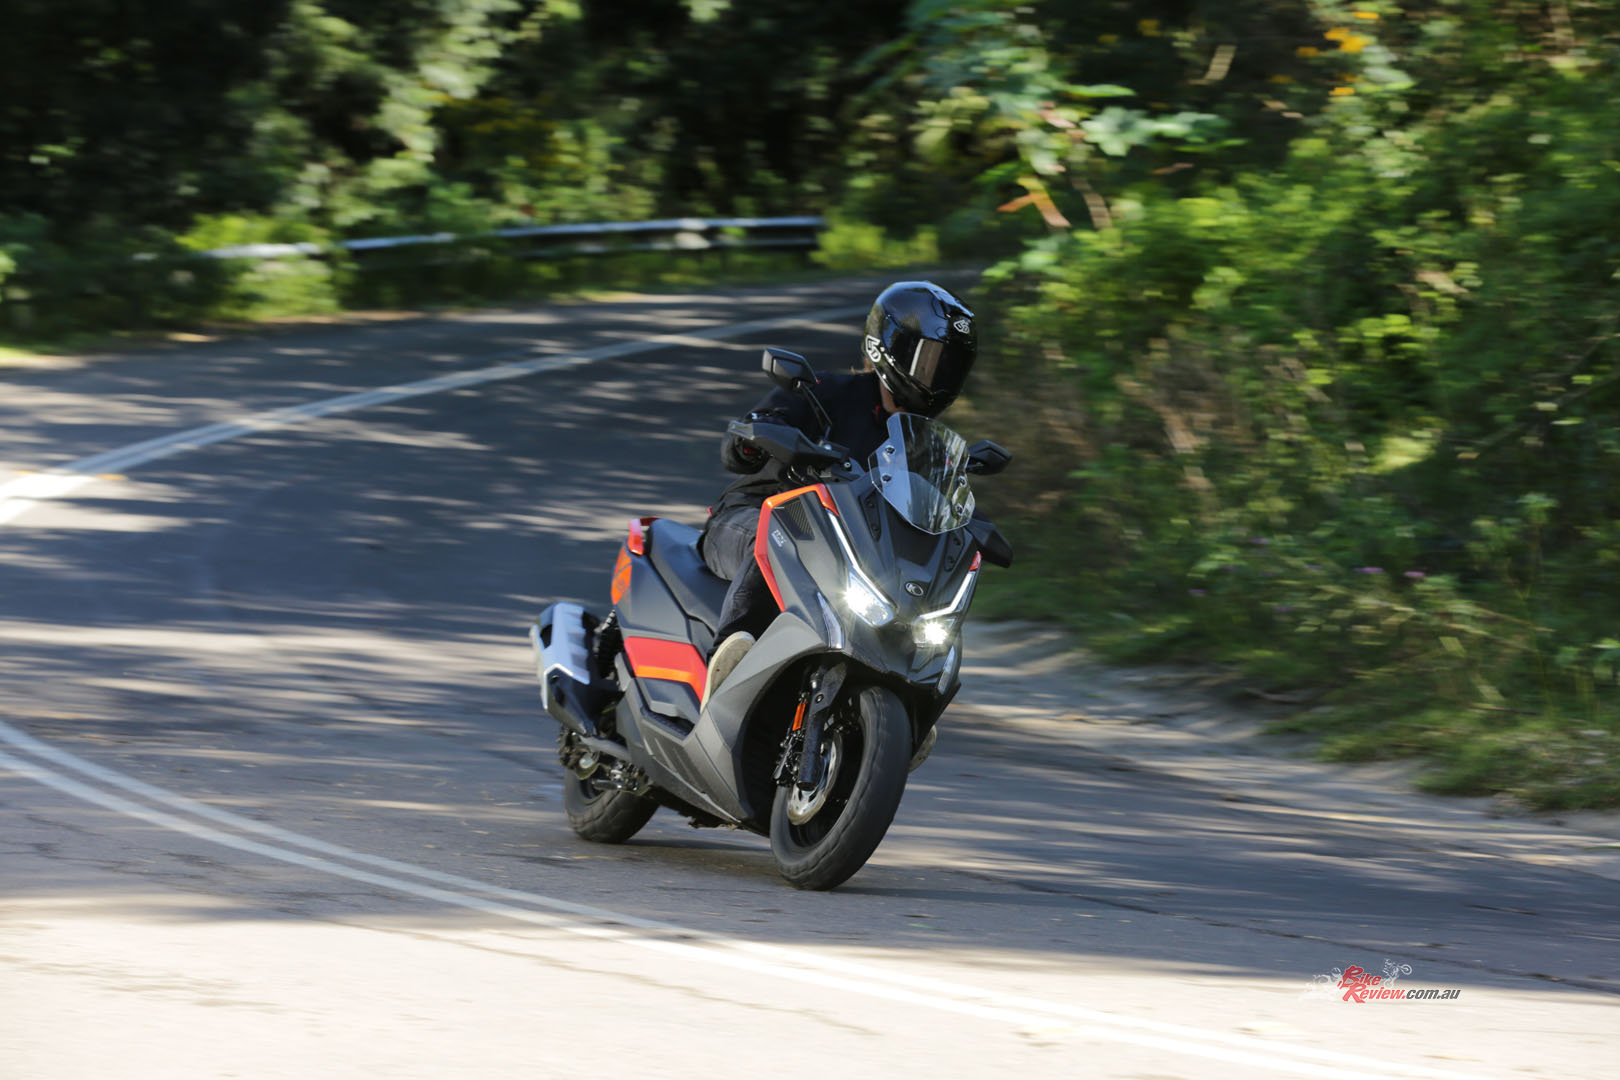 We knew the DT X360 was good fun off-road, so it was time to see how it could handle being thrown around the twisties.